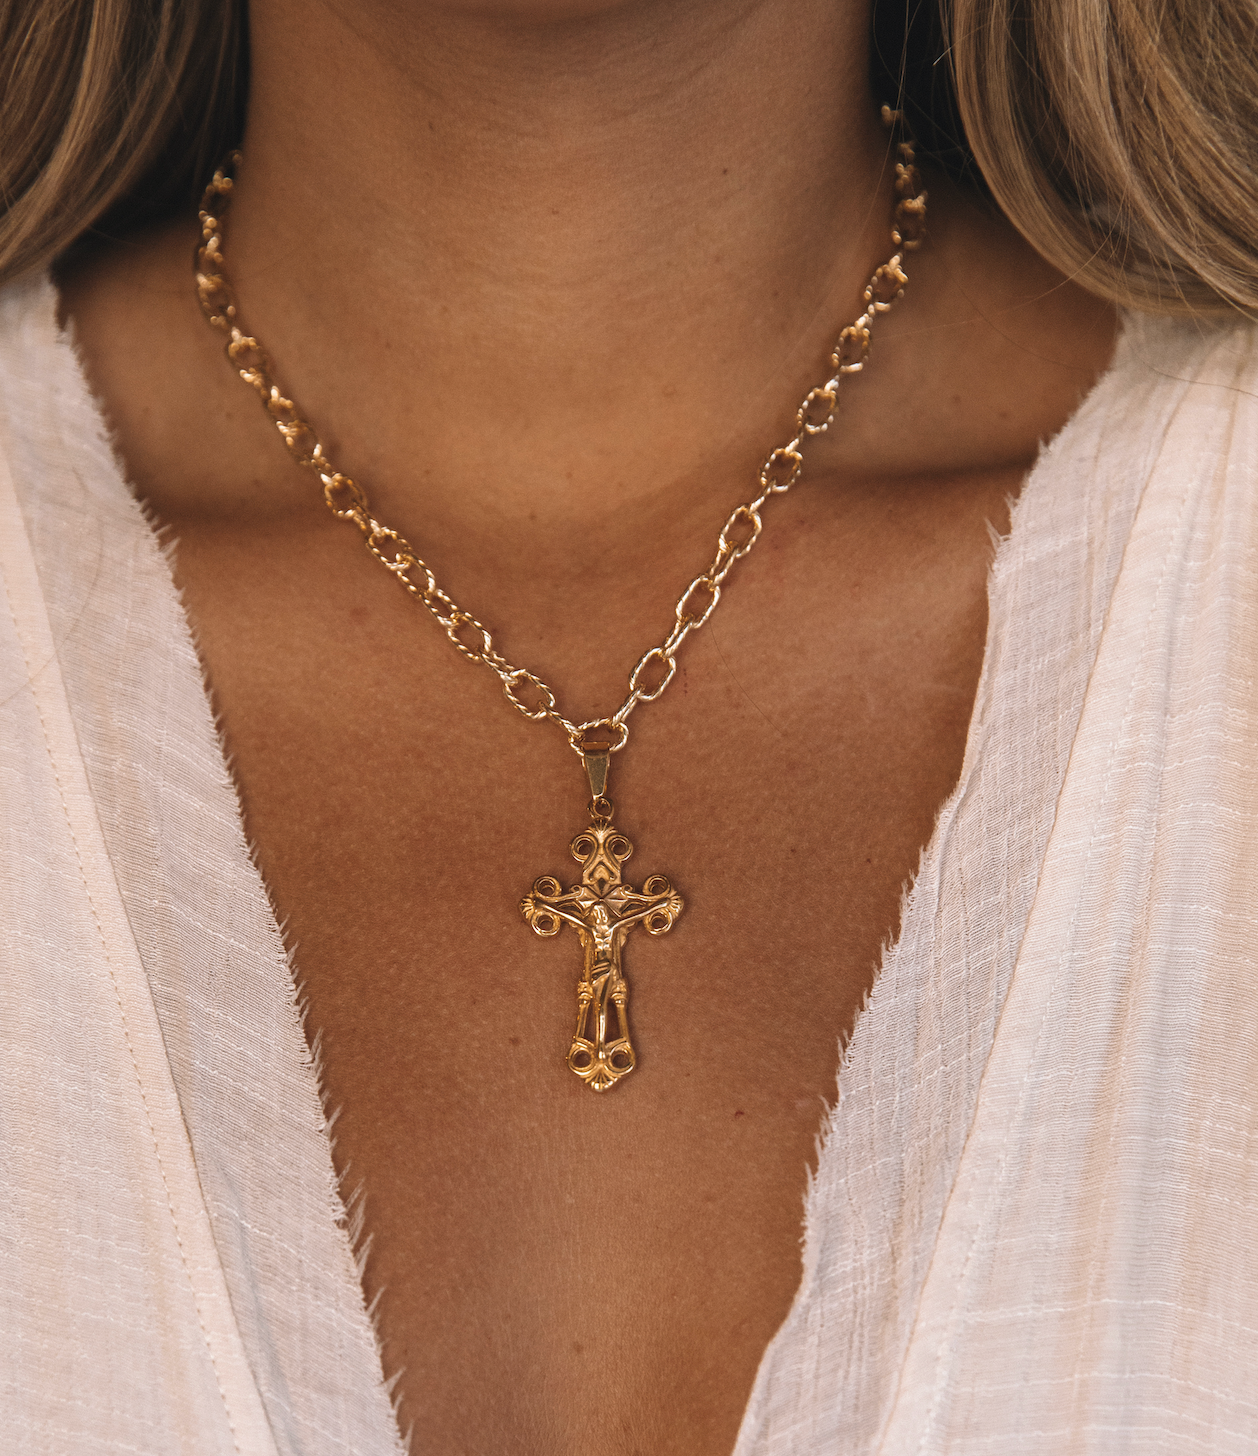 The XL Cross Necklace